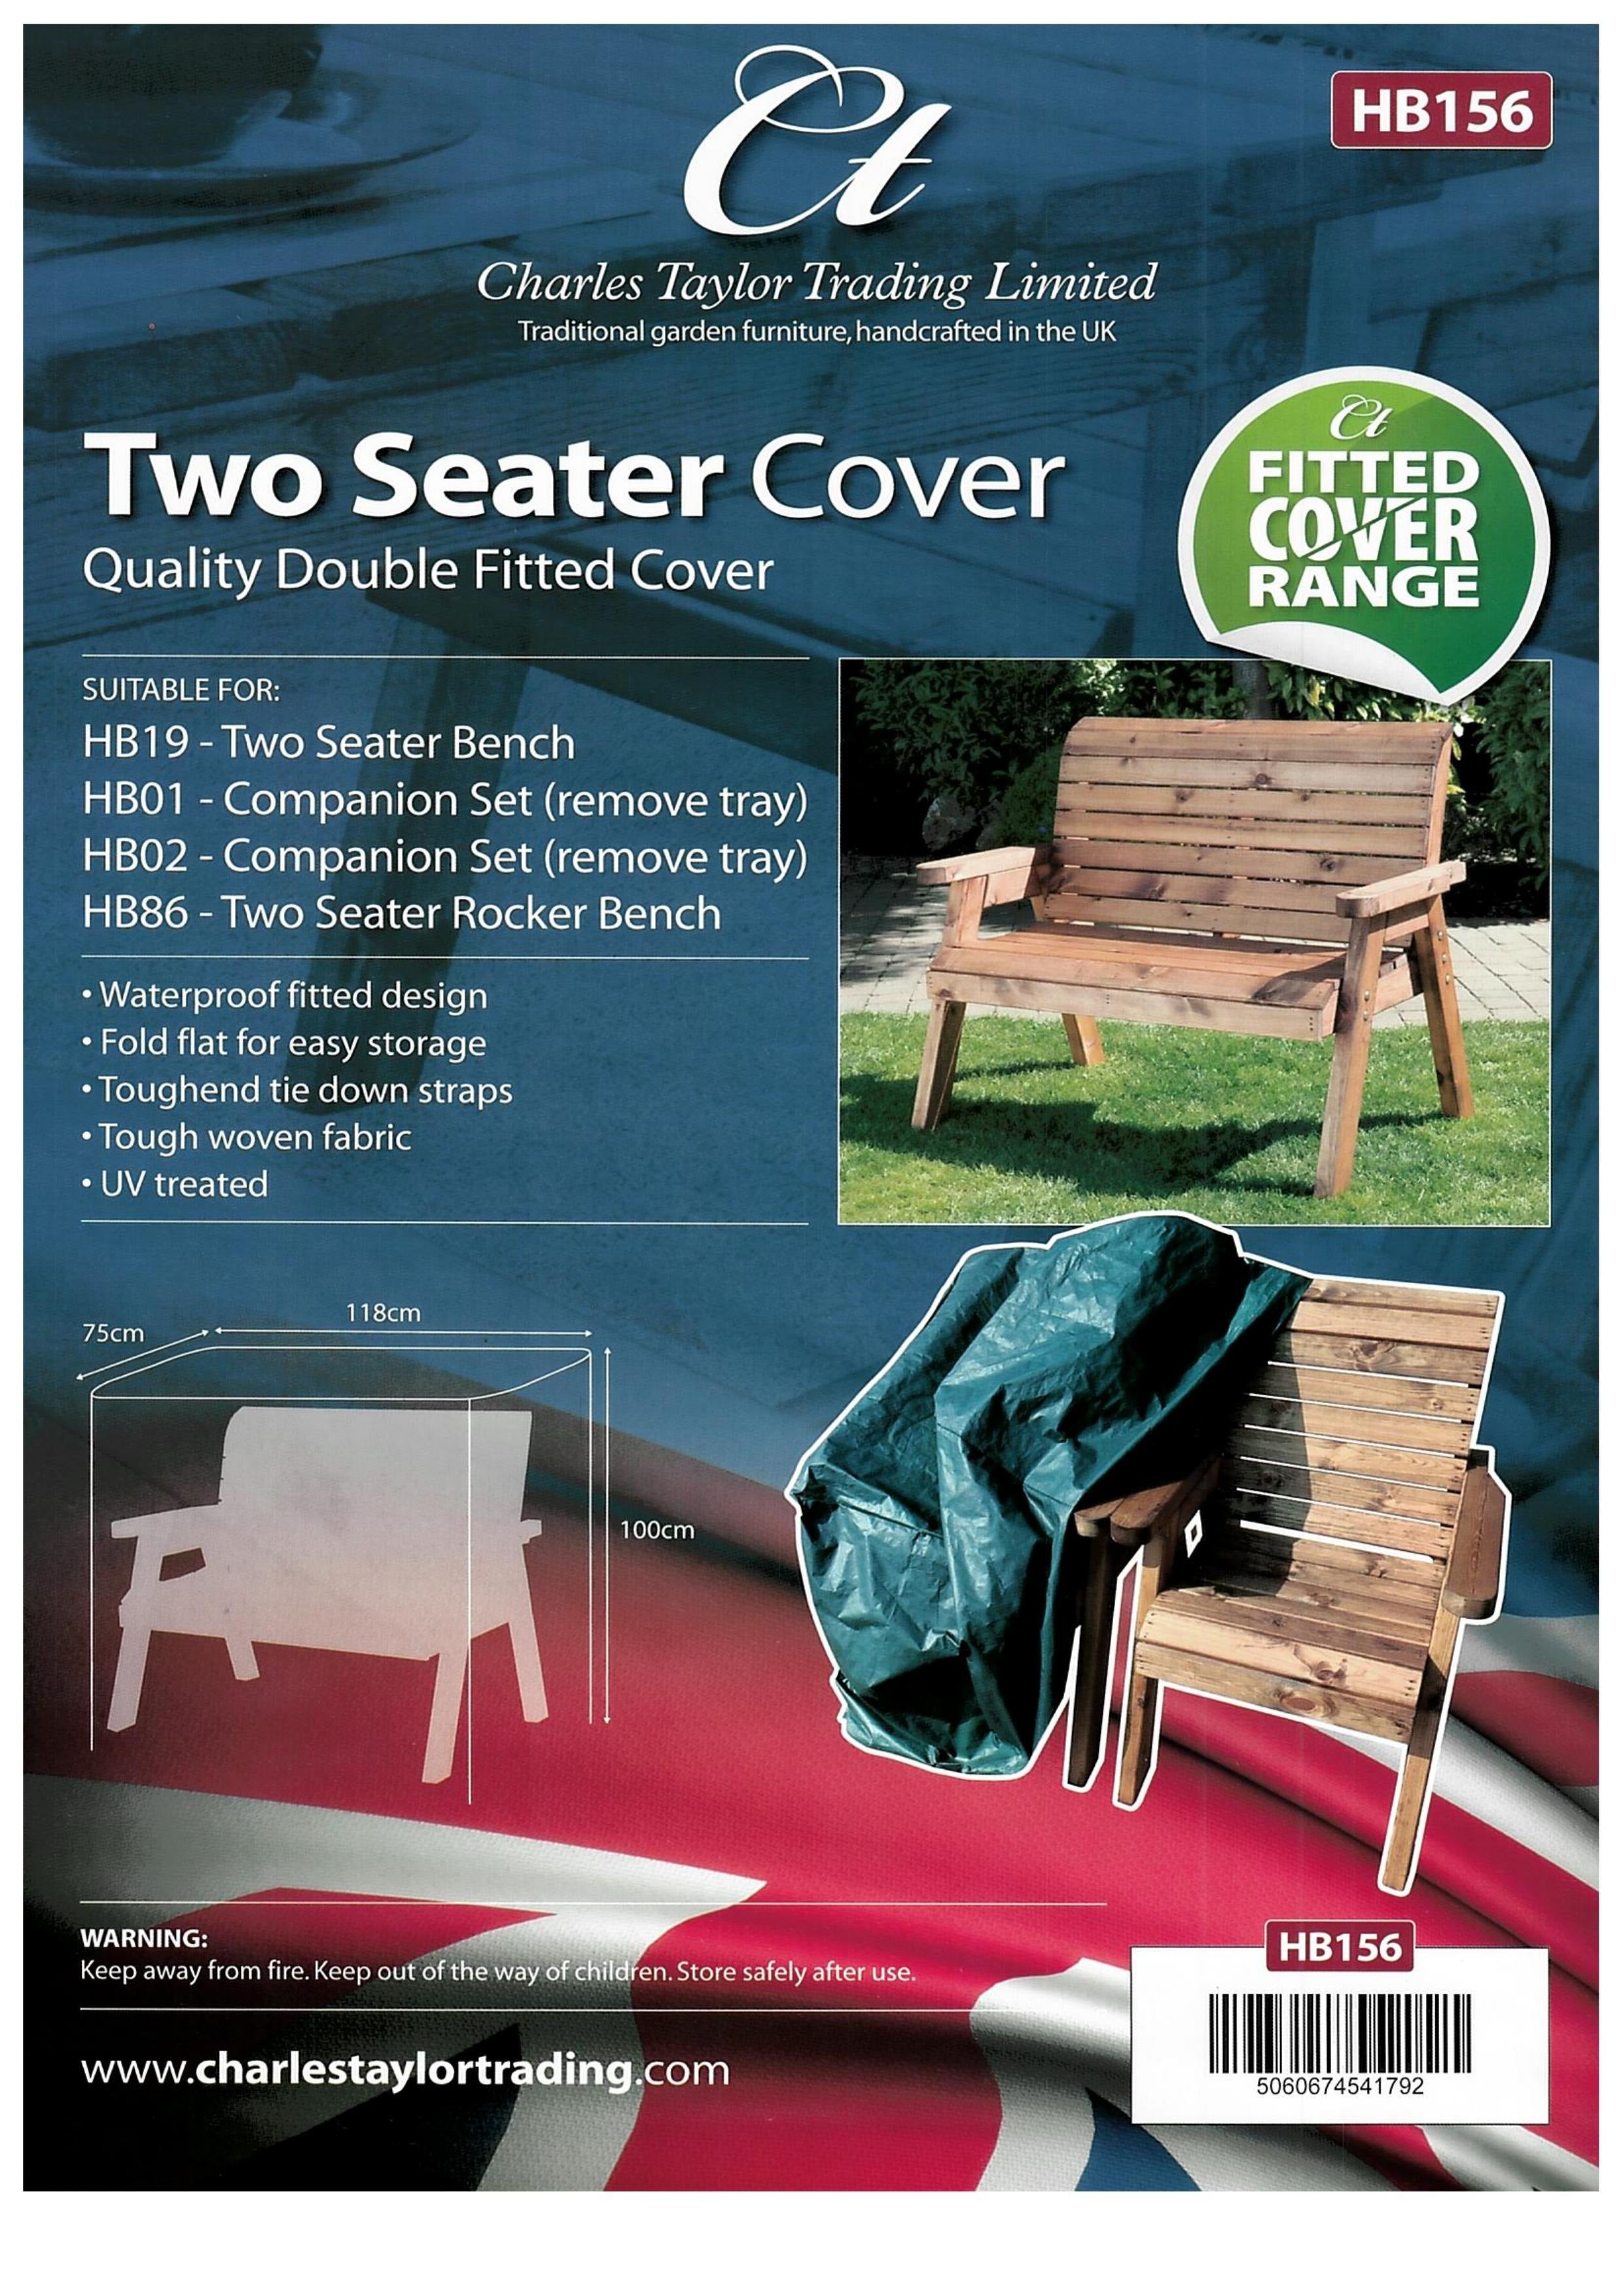 HB156 - Deluxe Fitted Twin Set Cover